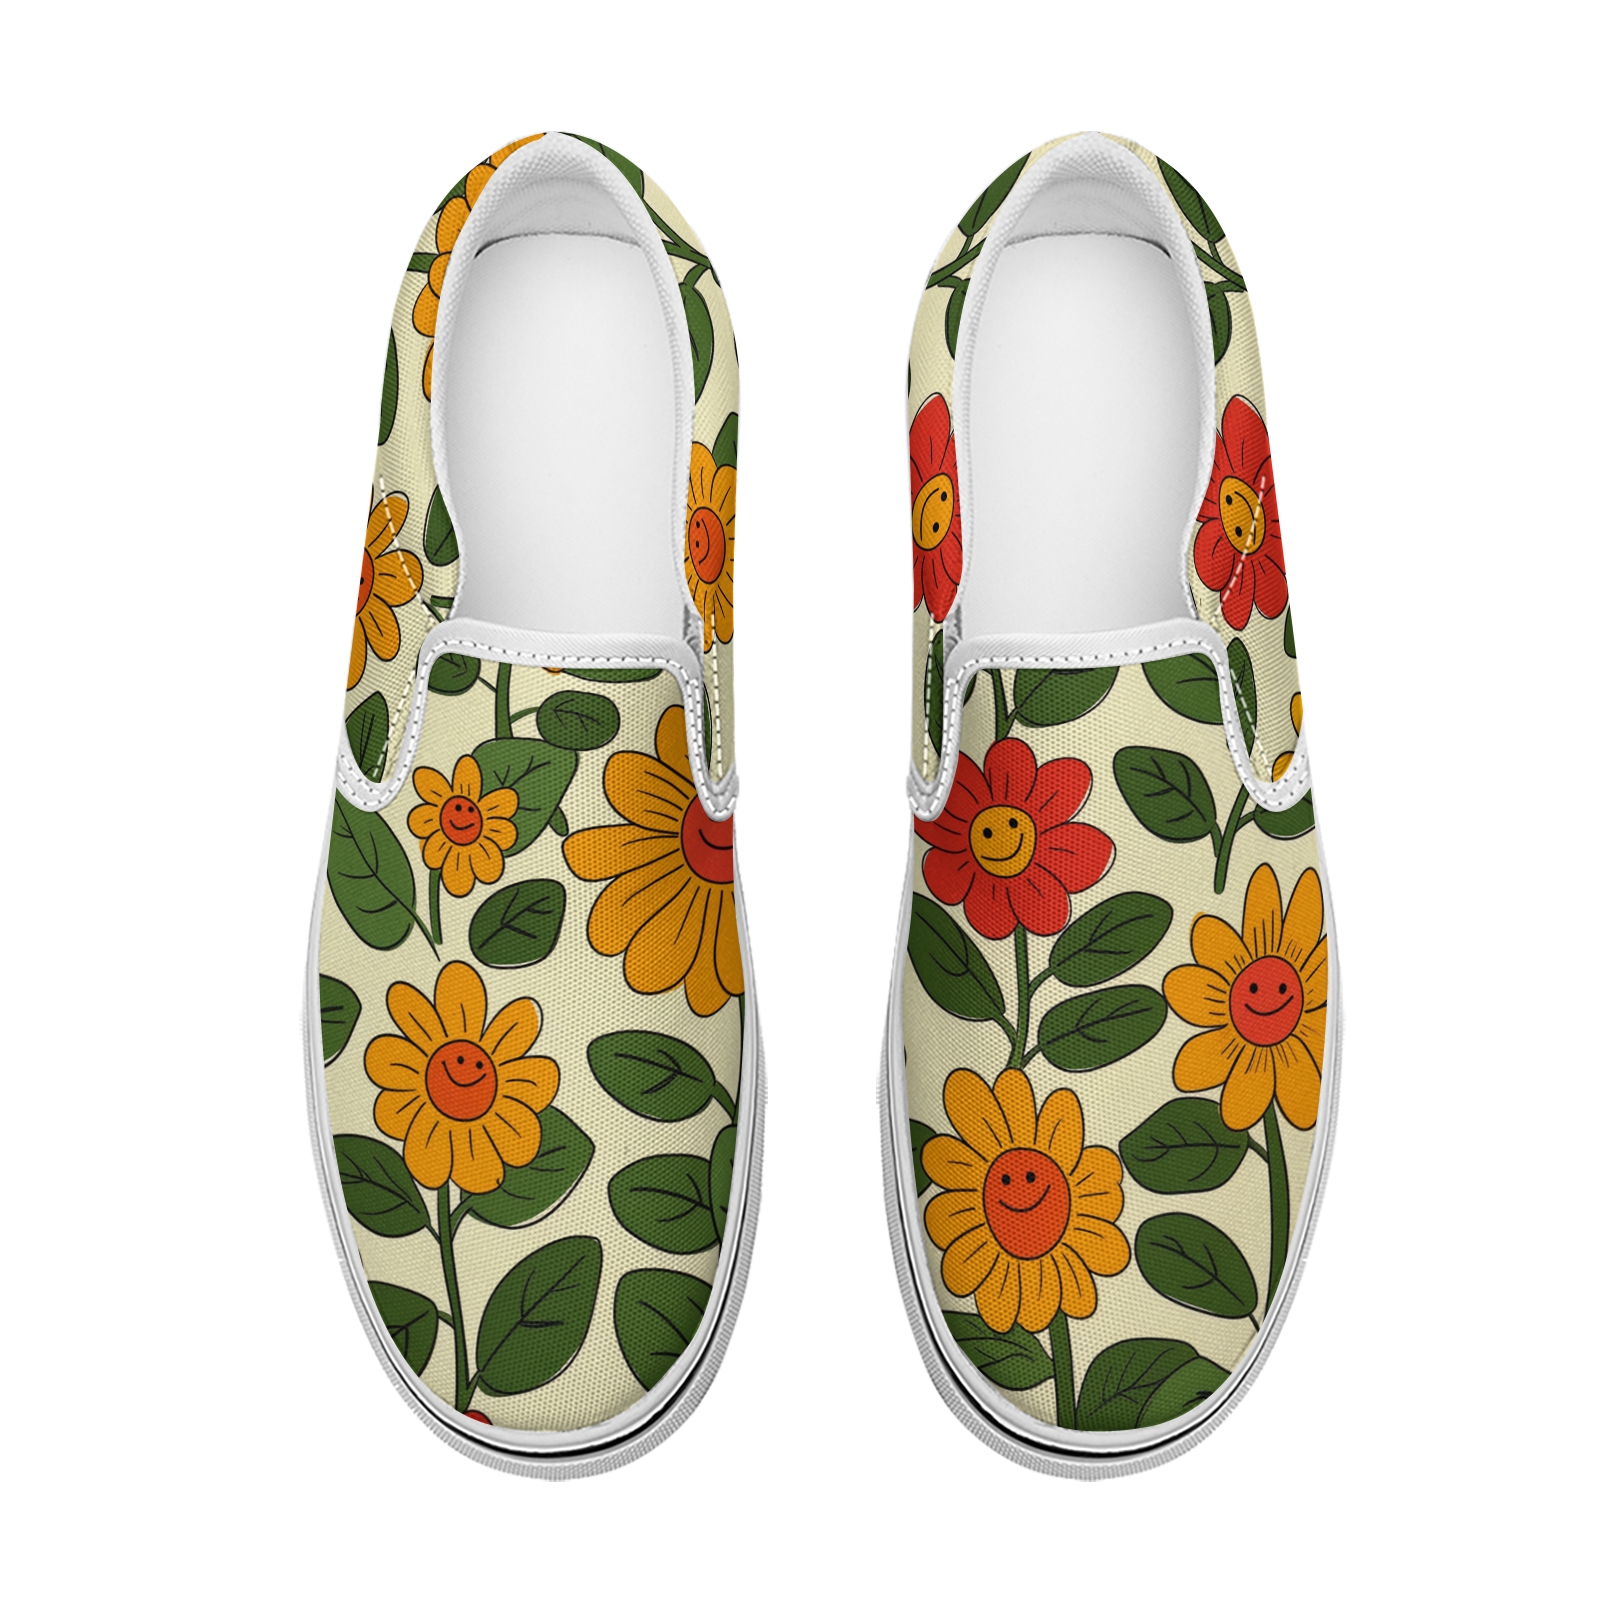 Women's fashion red and yellow daisy painted printed canvas sneakers low-top casual walking shoes classic comfortable flat fashion sneakers